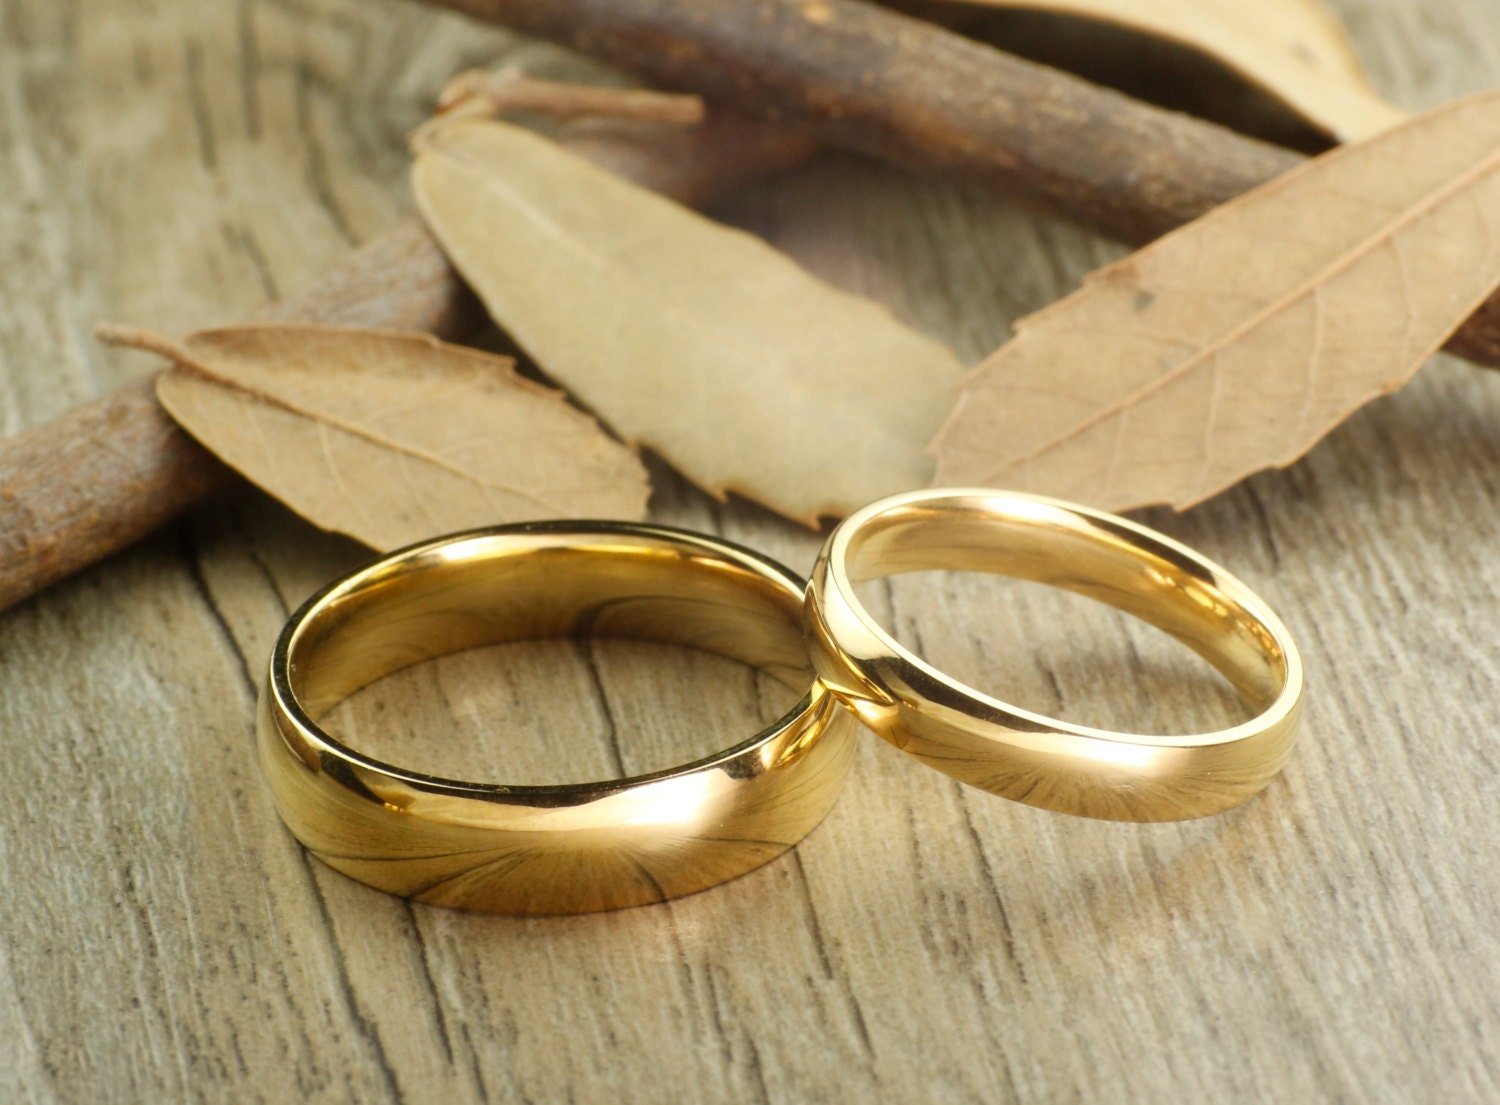 Handmade Gold Dome Plain Matching Wedding Bands Couple Rings